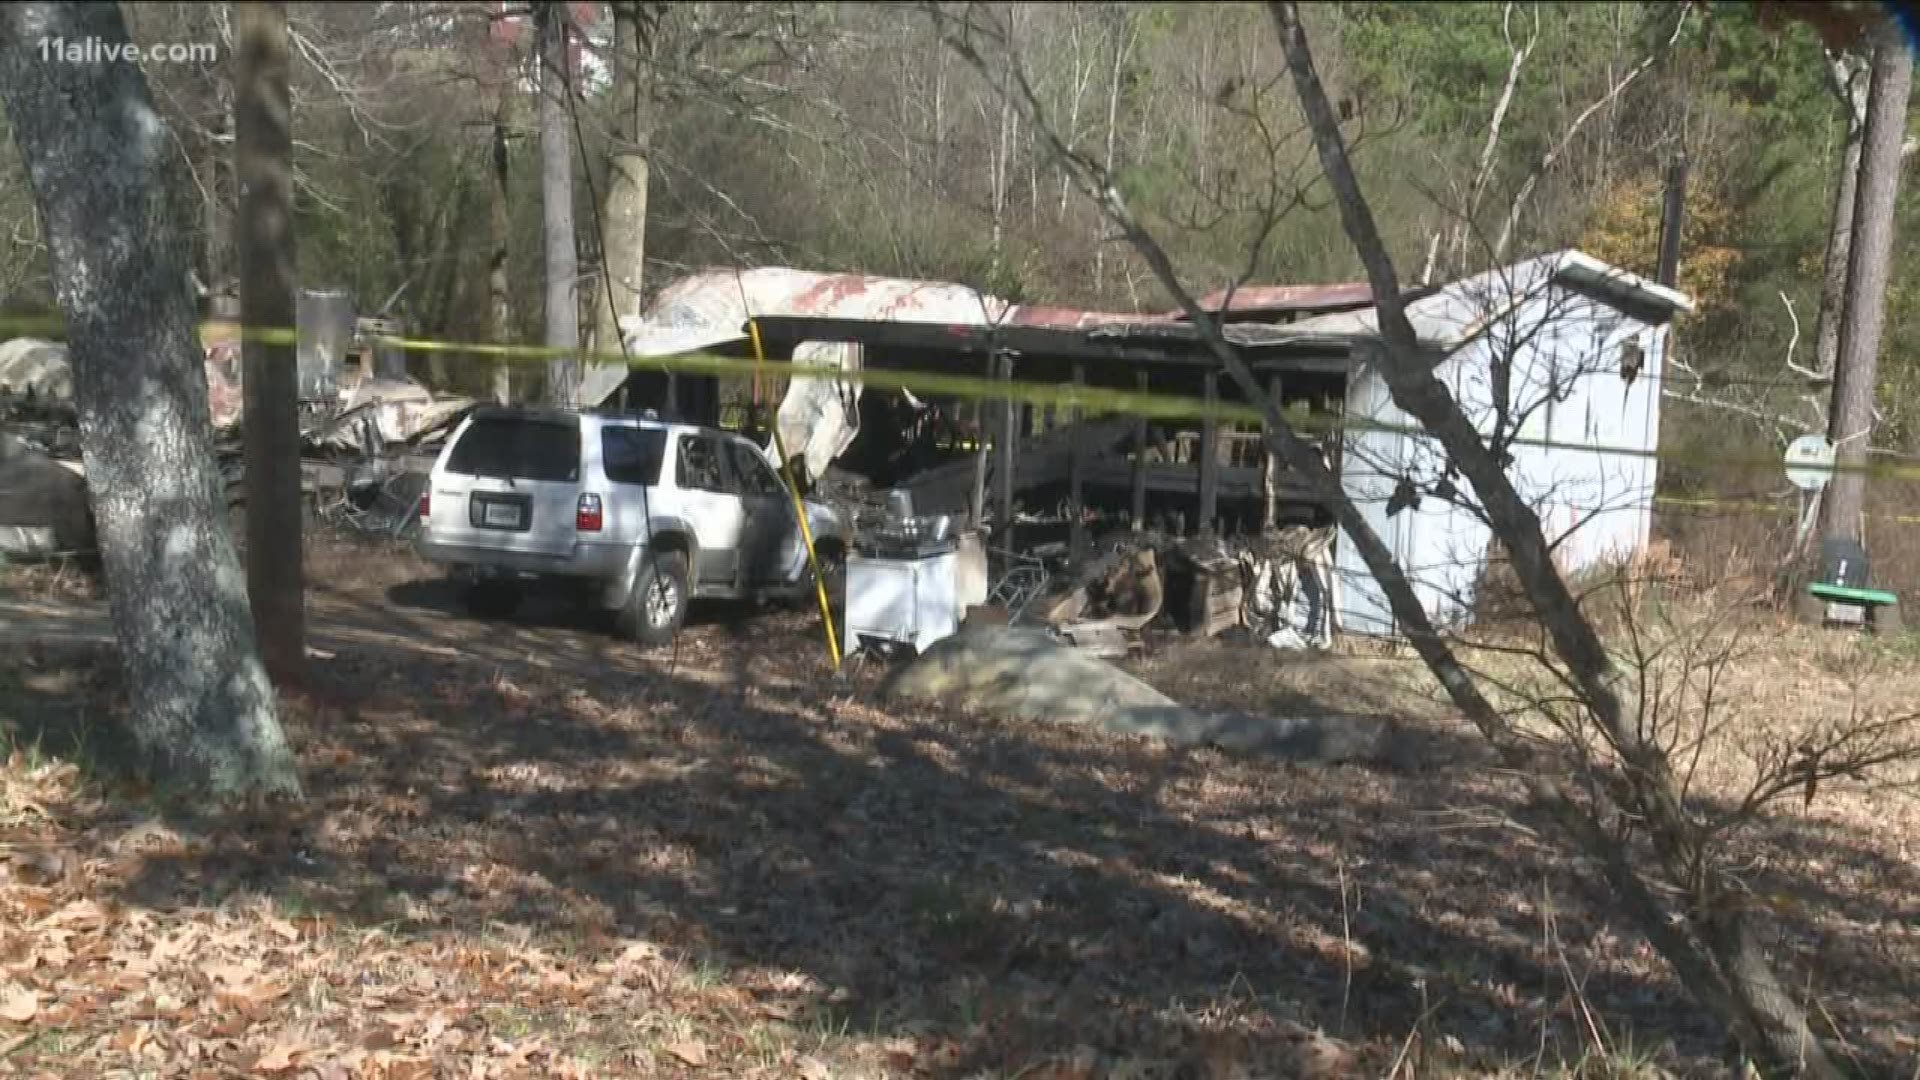 Two found dead after Hall County house fire, officials said | 11alive.com